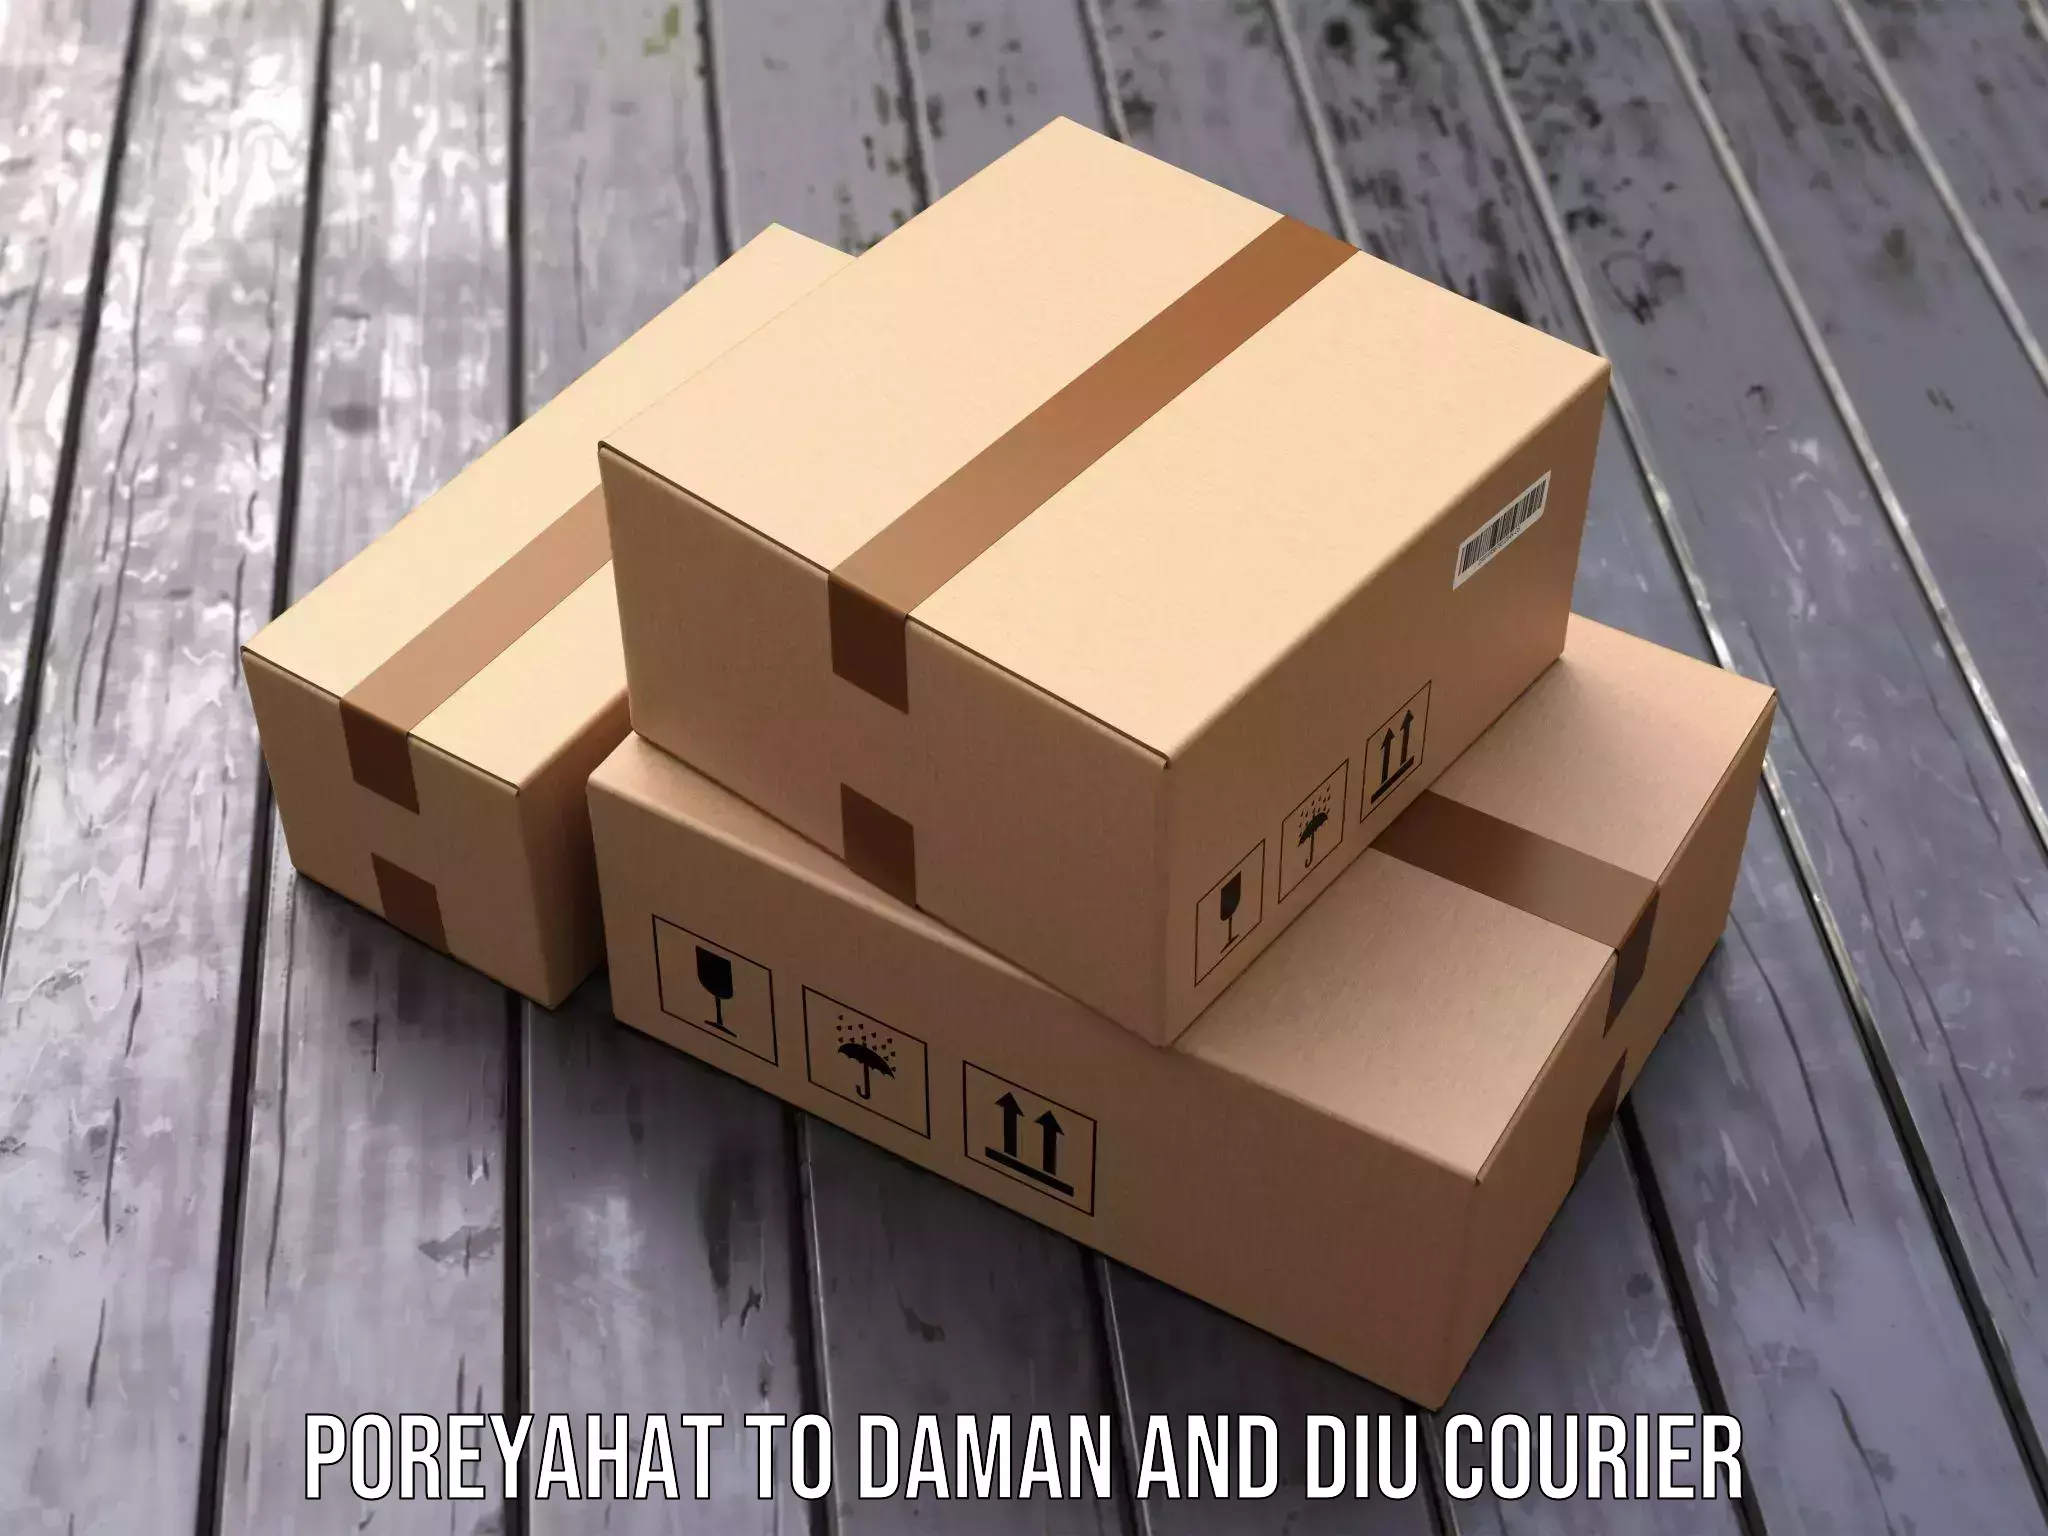 On-demand delivery Poreyahat to Daman and Diu